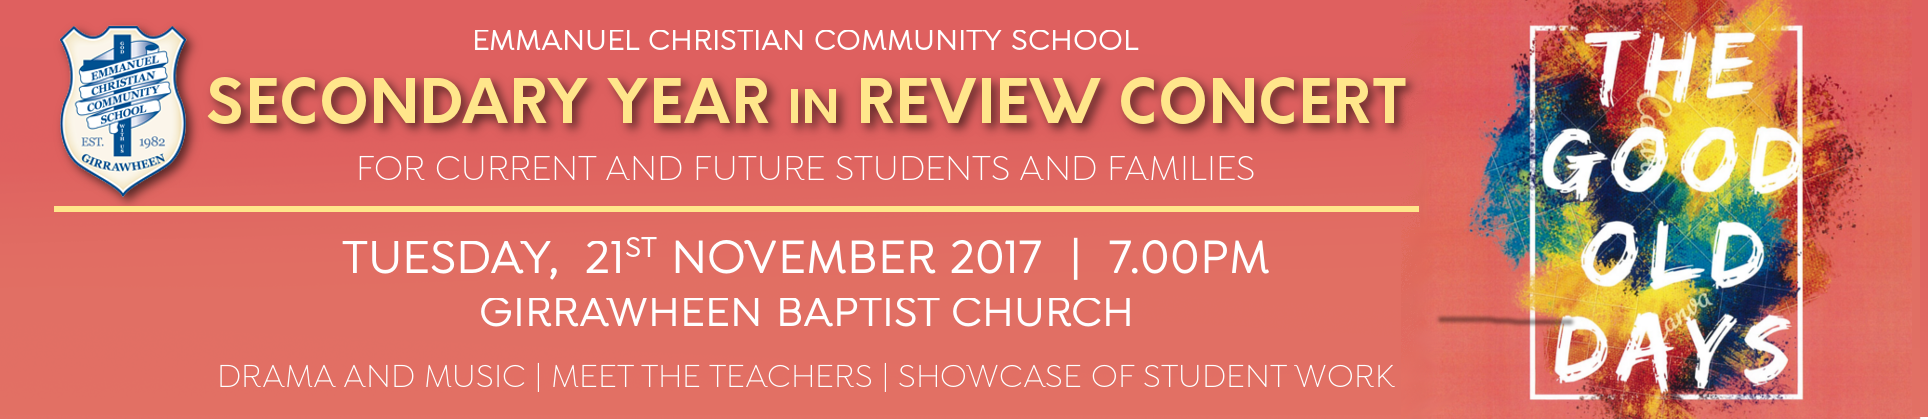 ECCS Secondary Year in Review Concert 2017